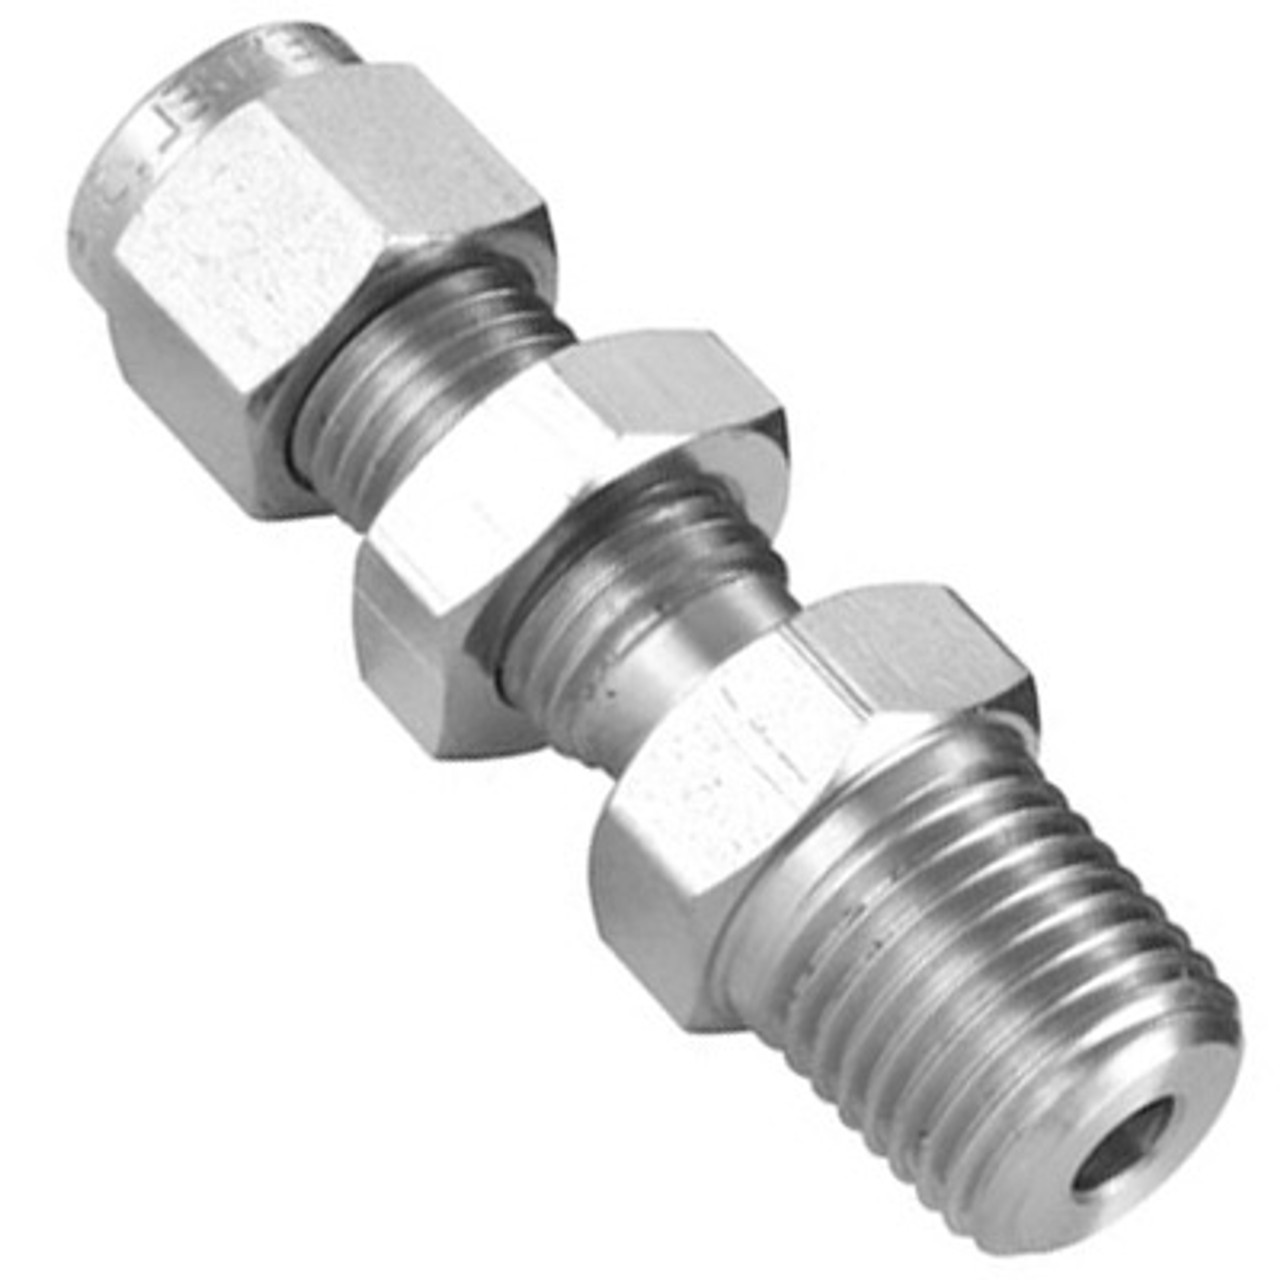 Compression Fittings Stainless Steel 14 Tube X 14 Npt Bulkhead